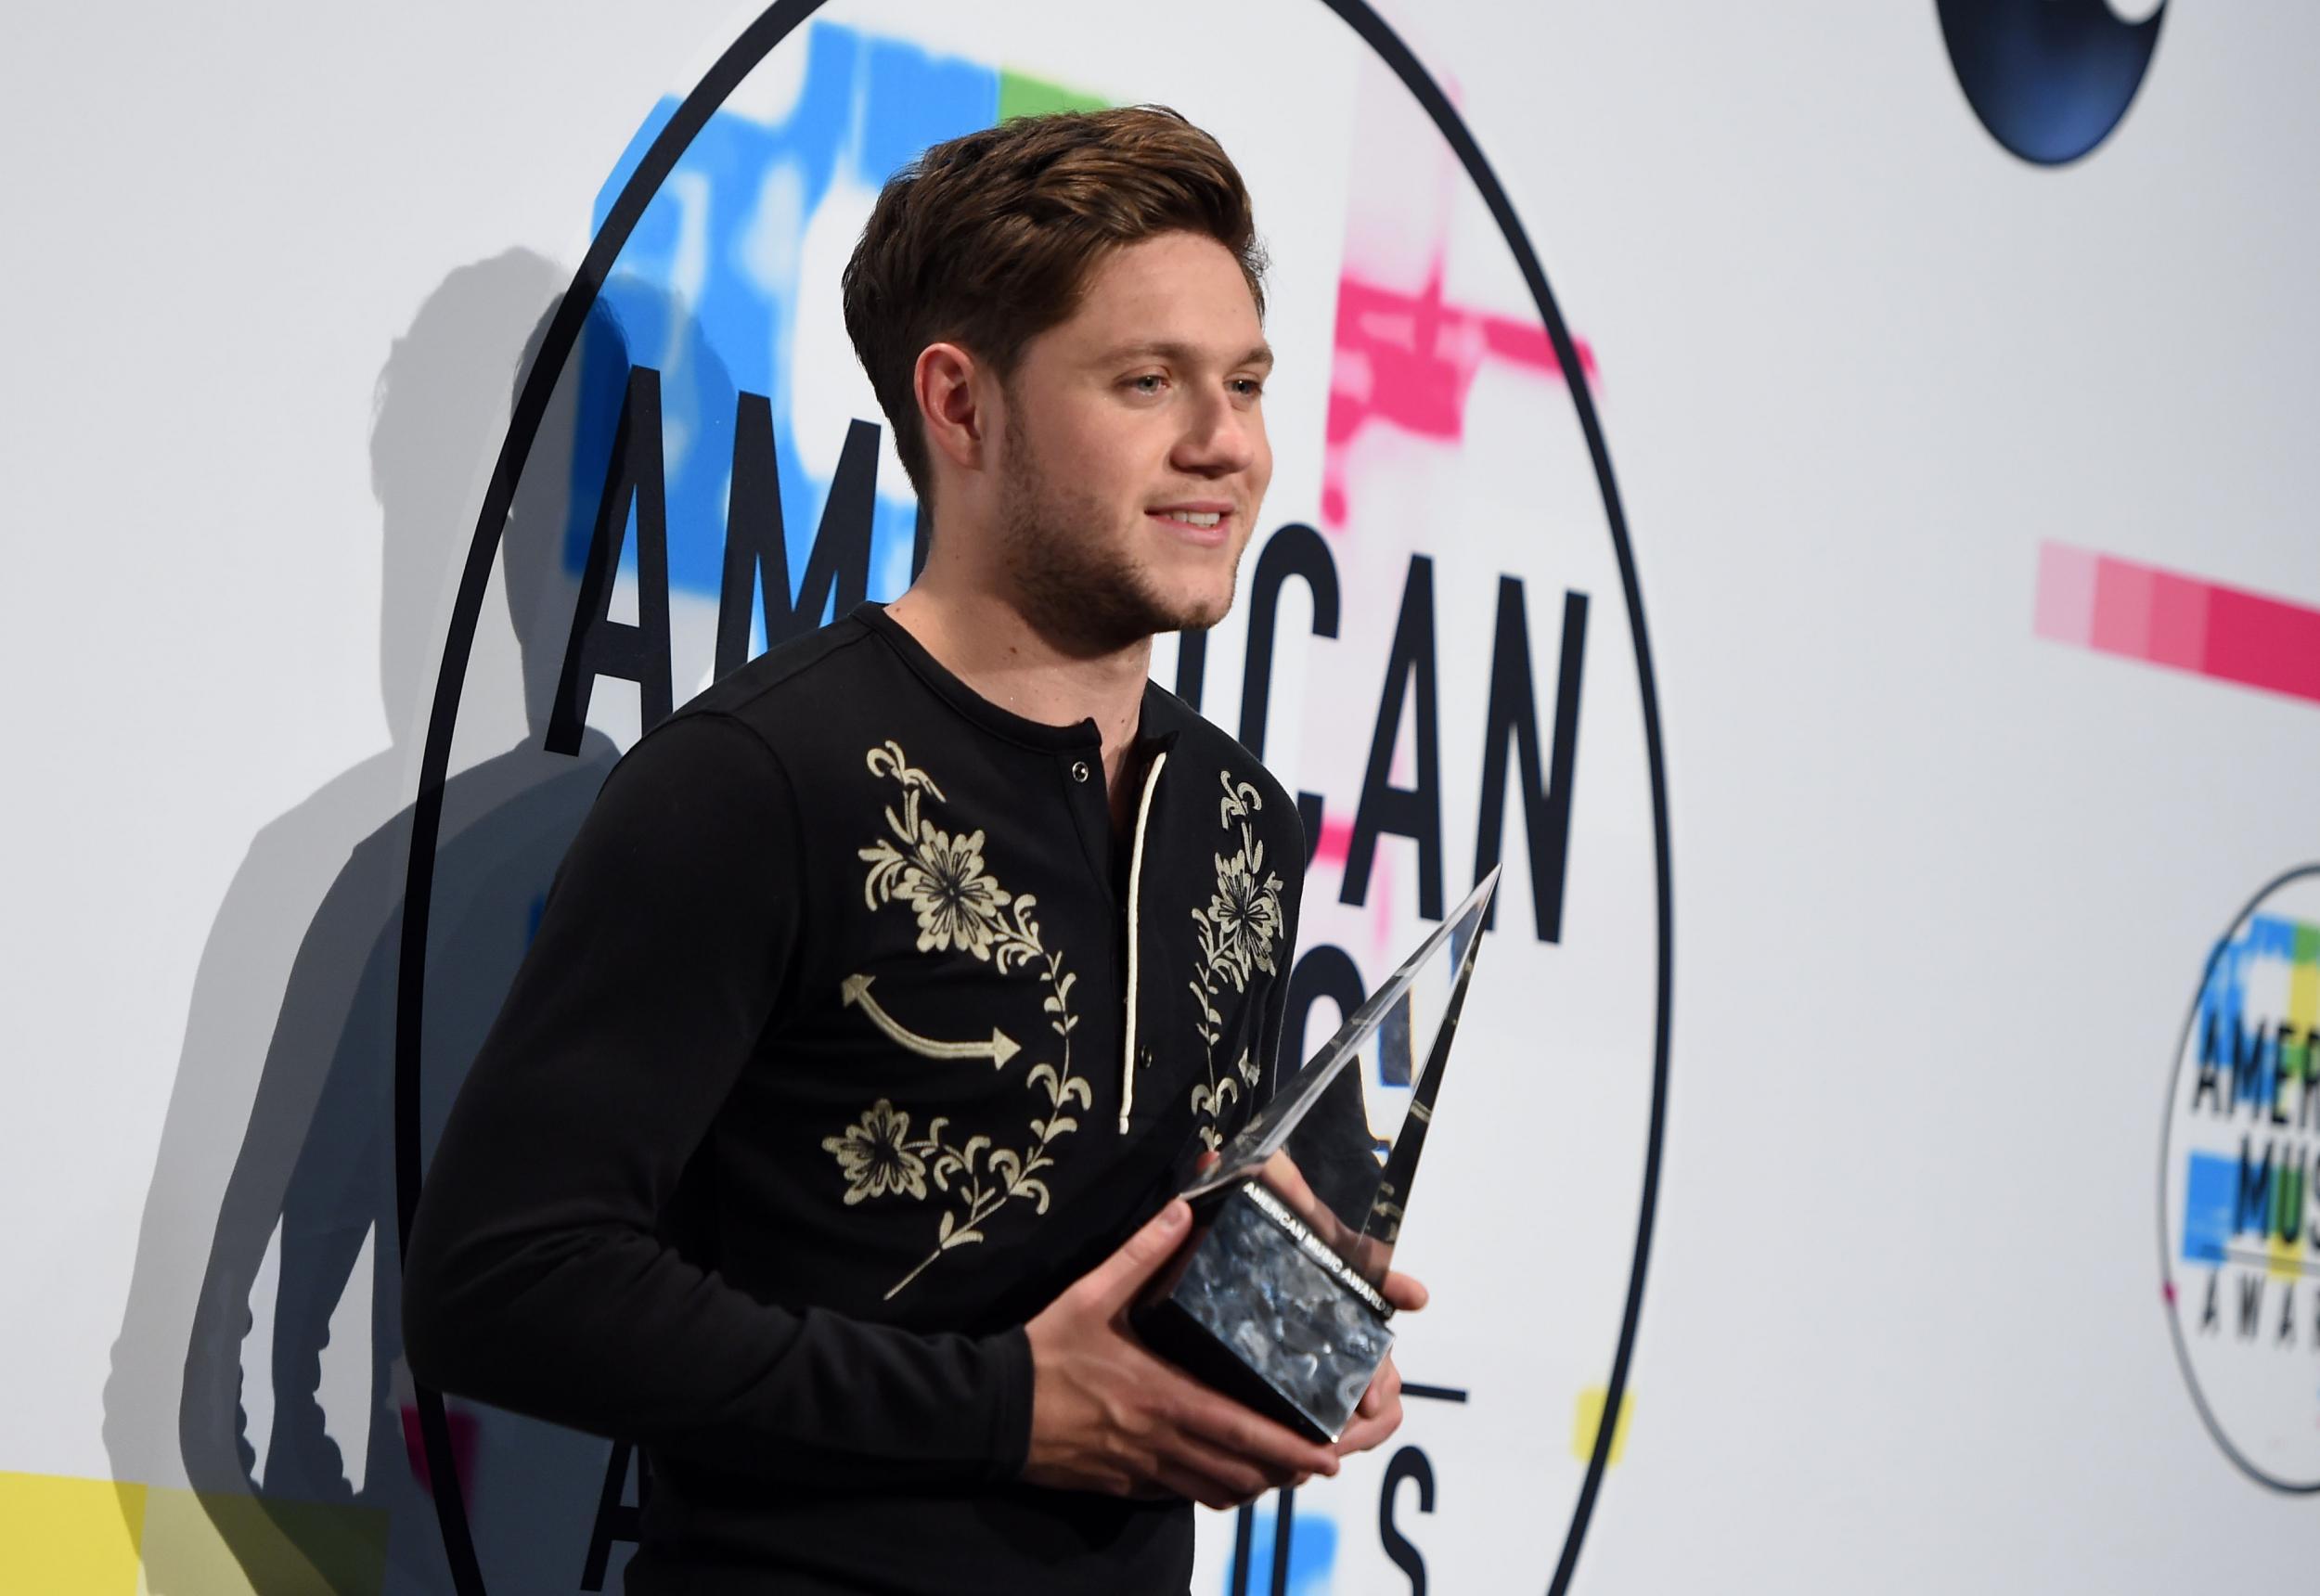 Niall Horan poses with his Best New Artist award at the AMAs